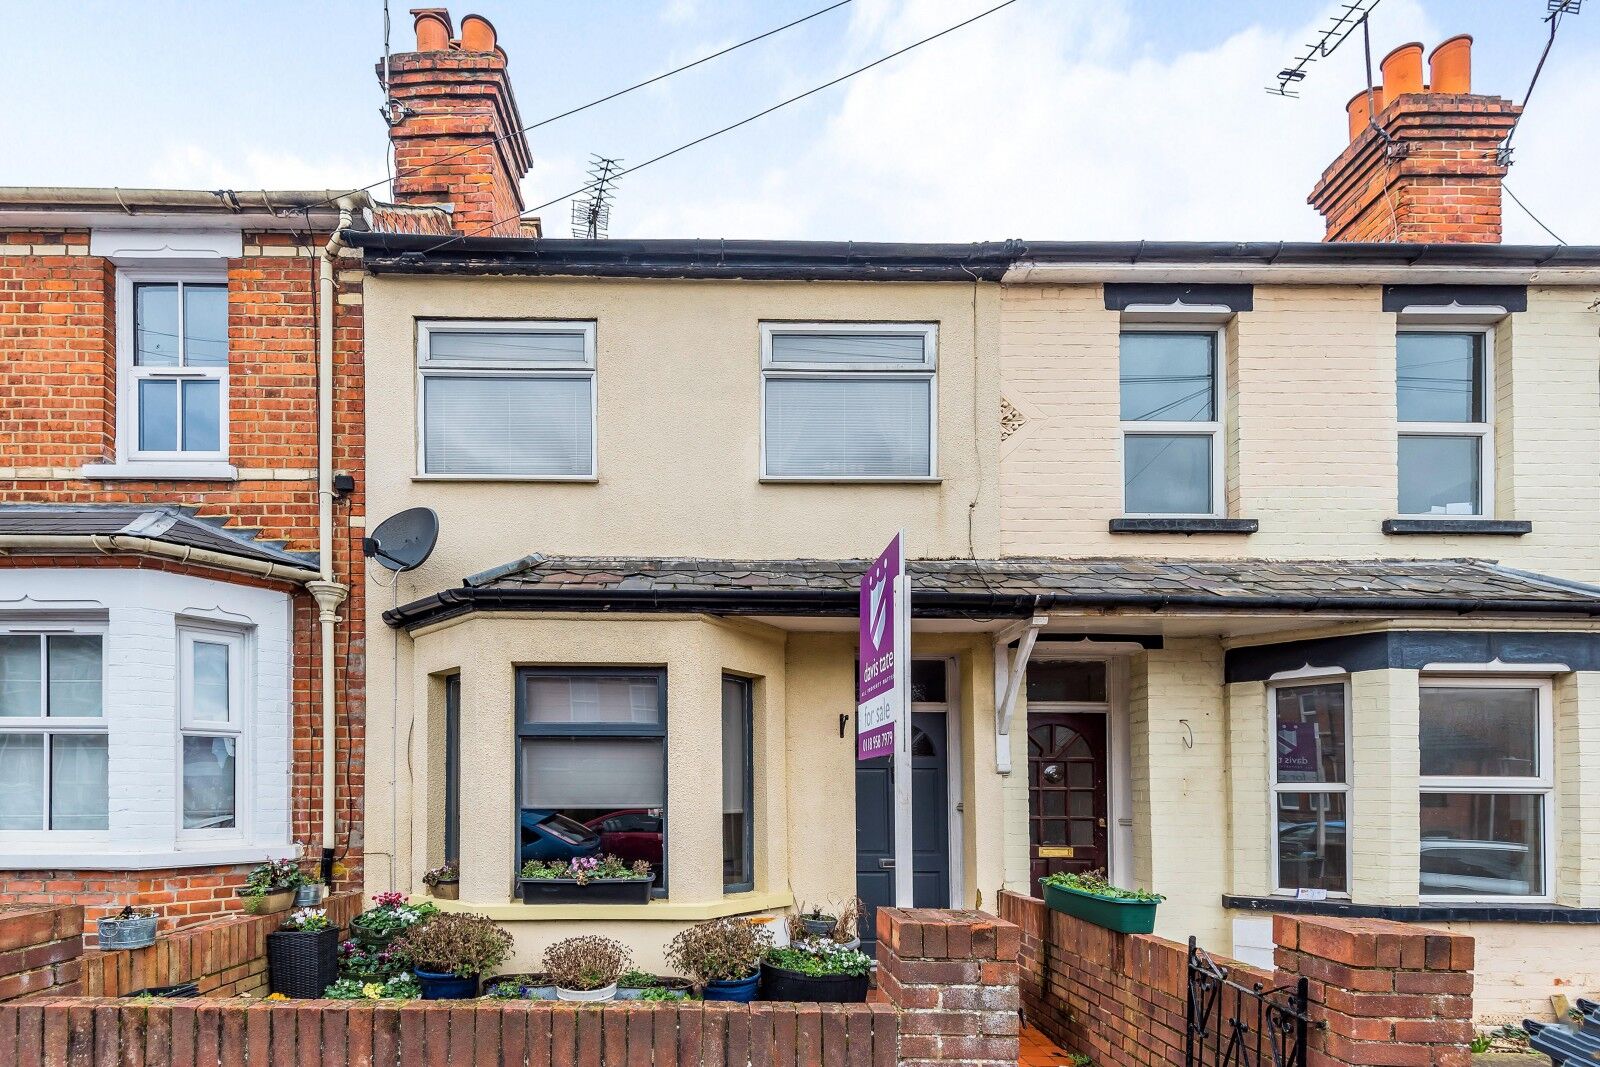 3 bedroom mid terraced house for sale Shaftesbury Road, Reading, RG30, main image